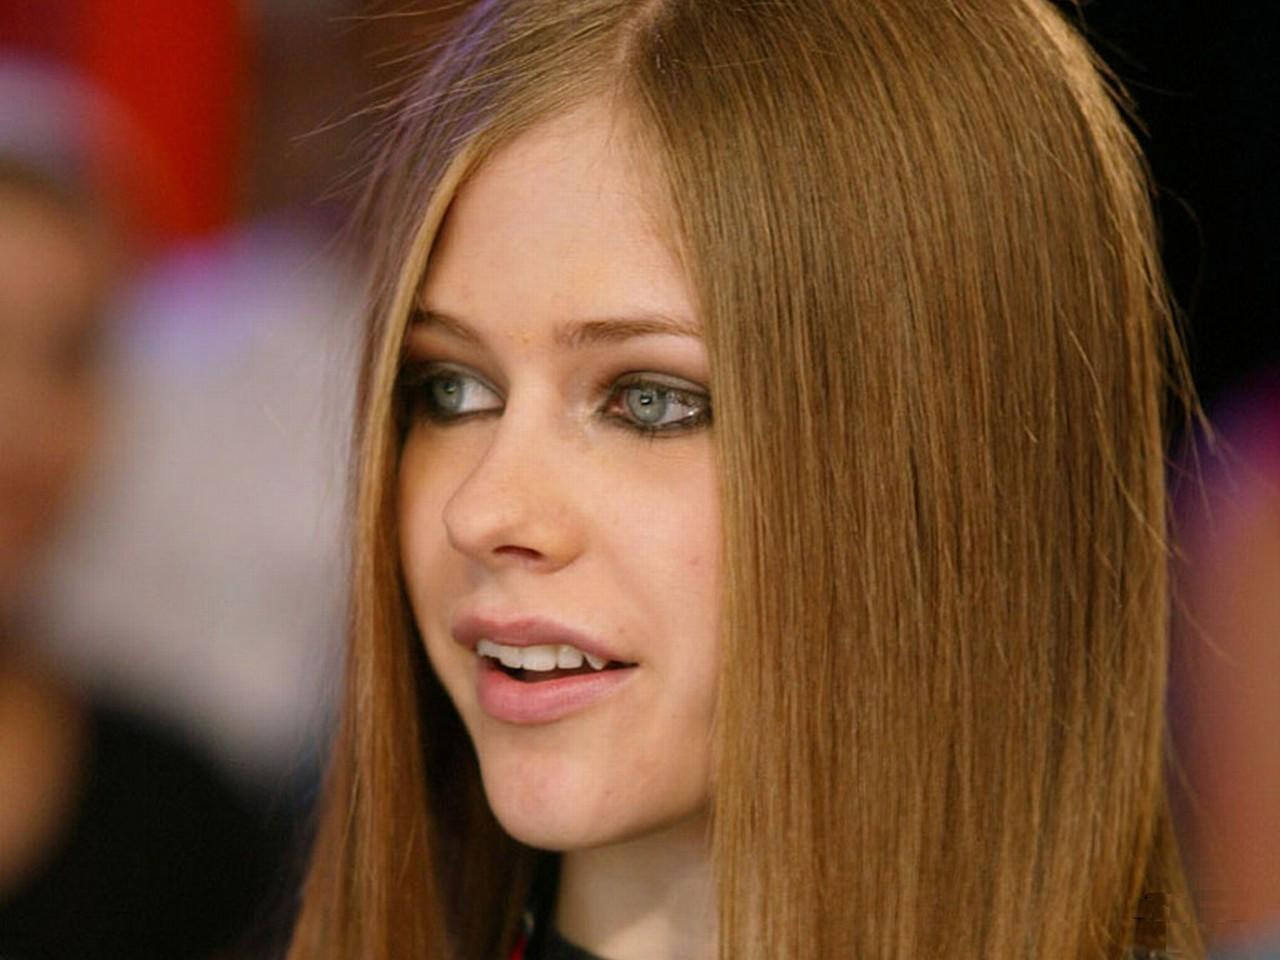 Avril Lavigne Hot Pictures, Photo Gallery & Wallpapers: Avril Lavigne Pictures1280 x 960